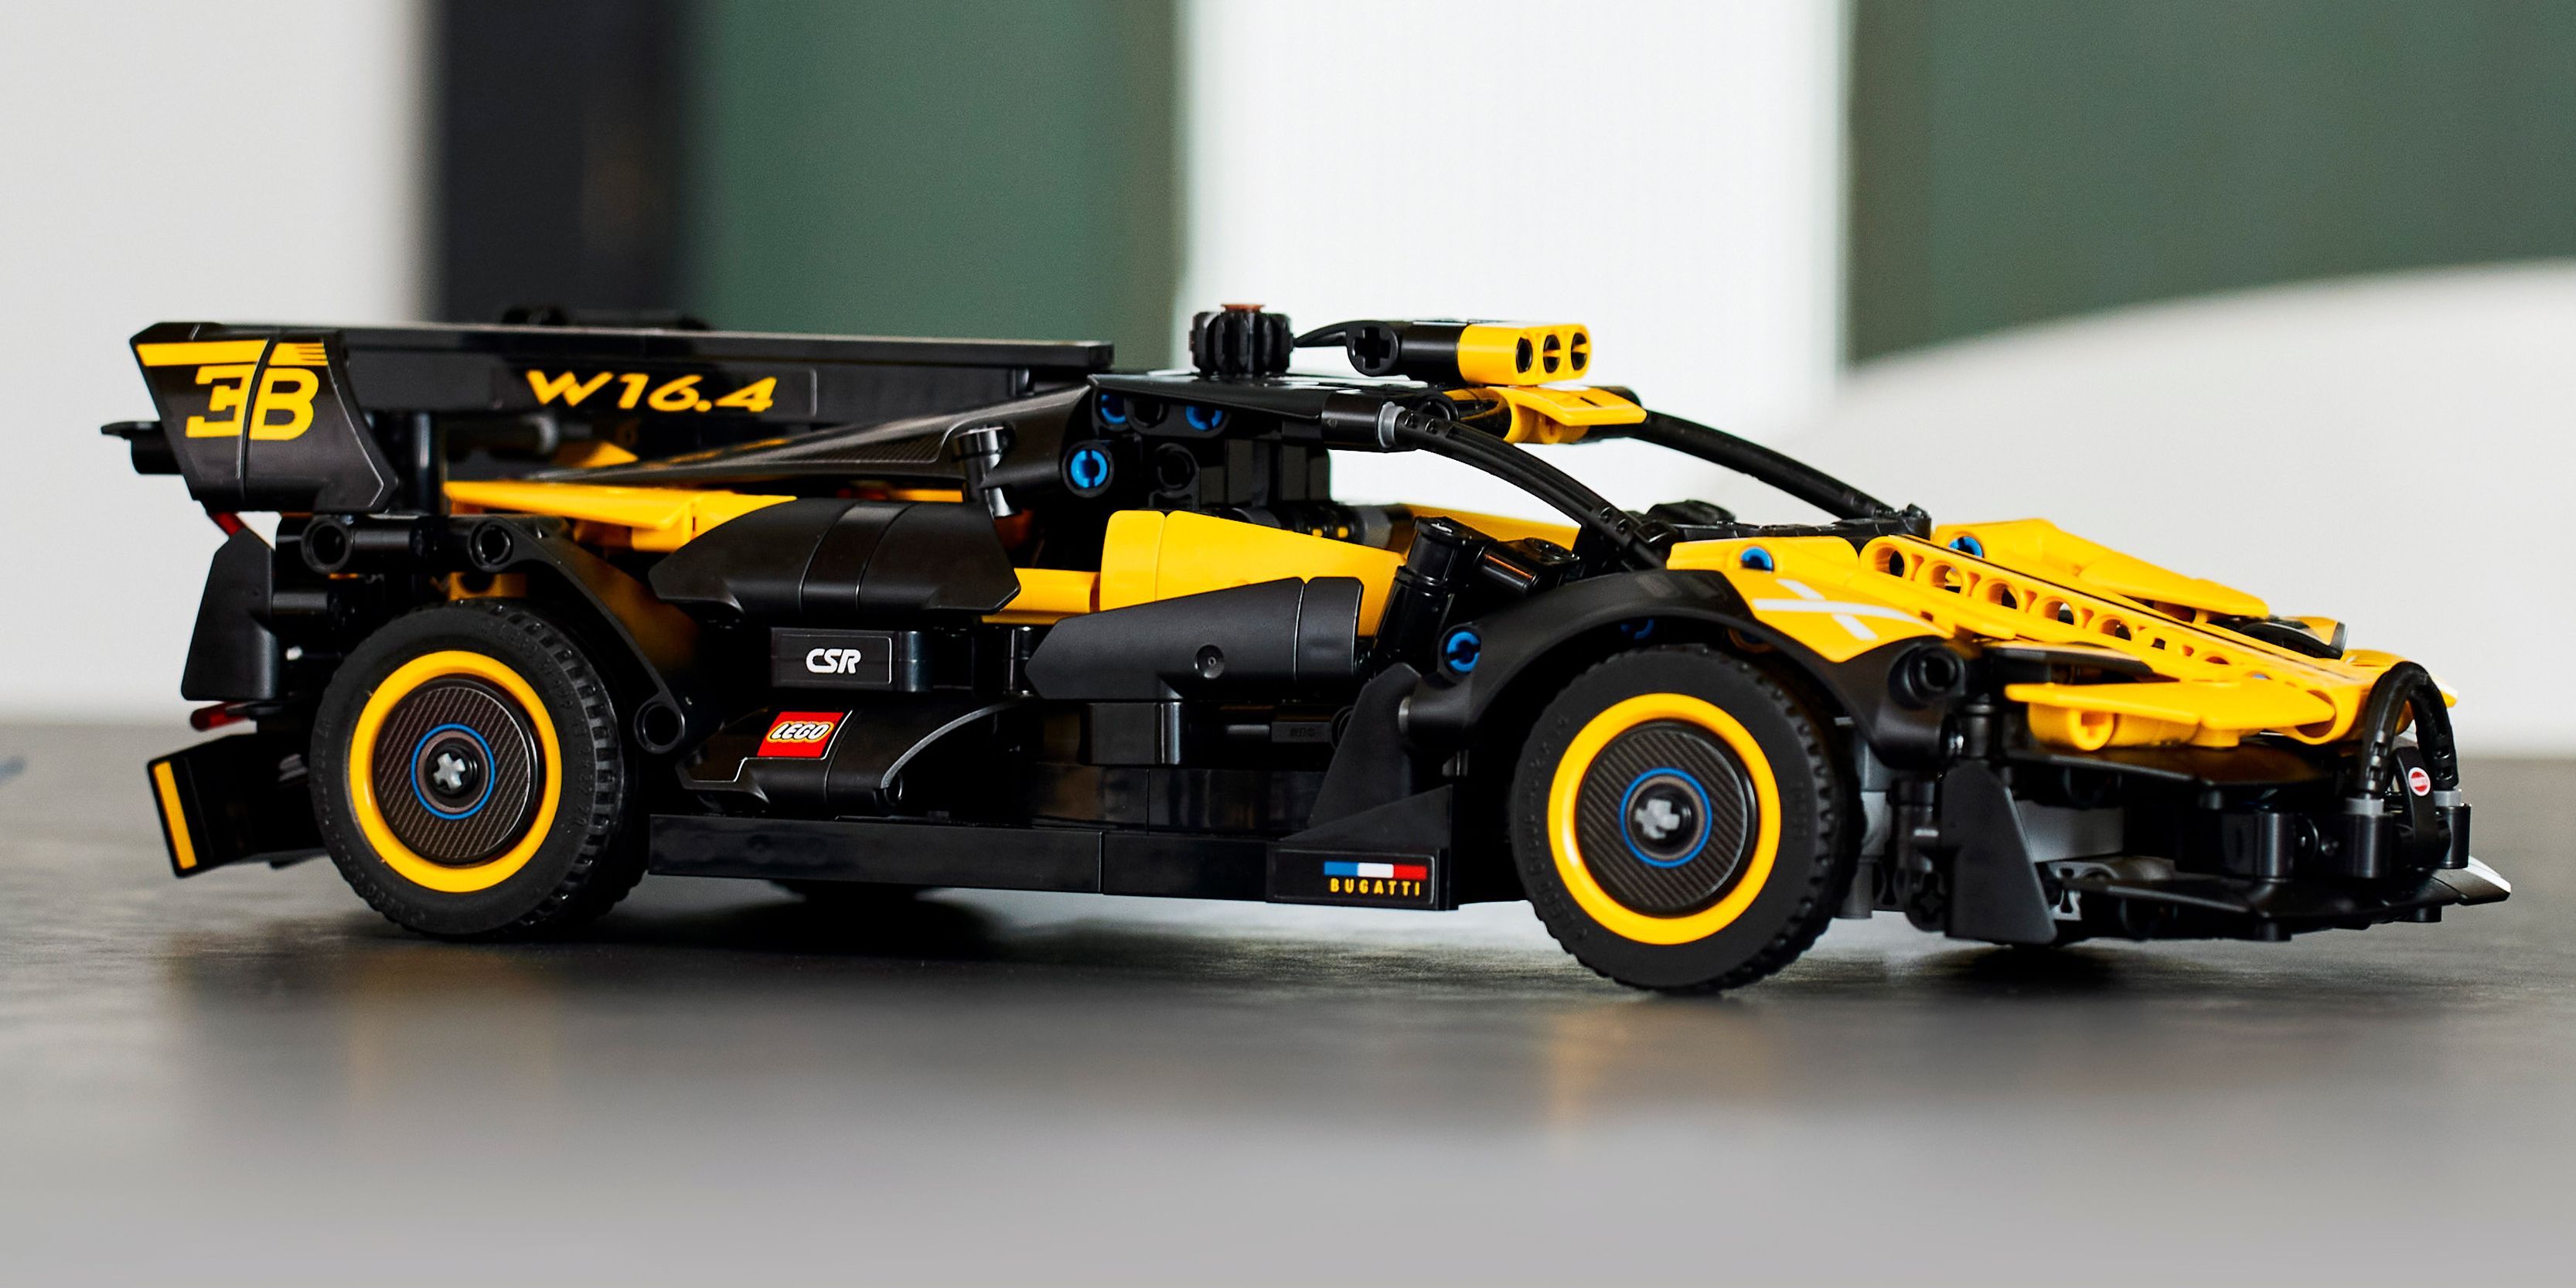 Build Your Own 1500-HP Hypercar With the Lego Technic Bugatti Bolide